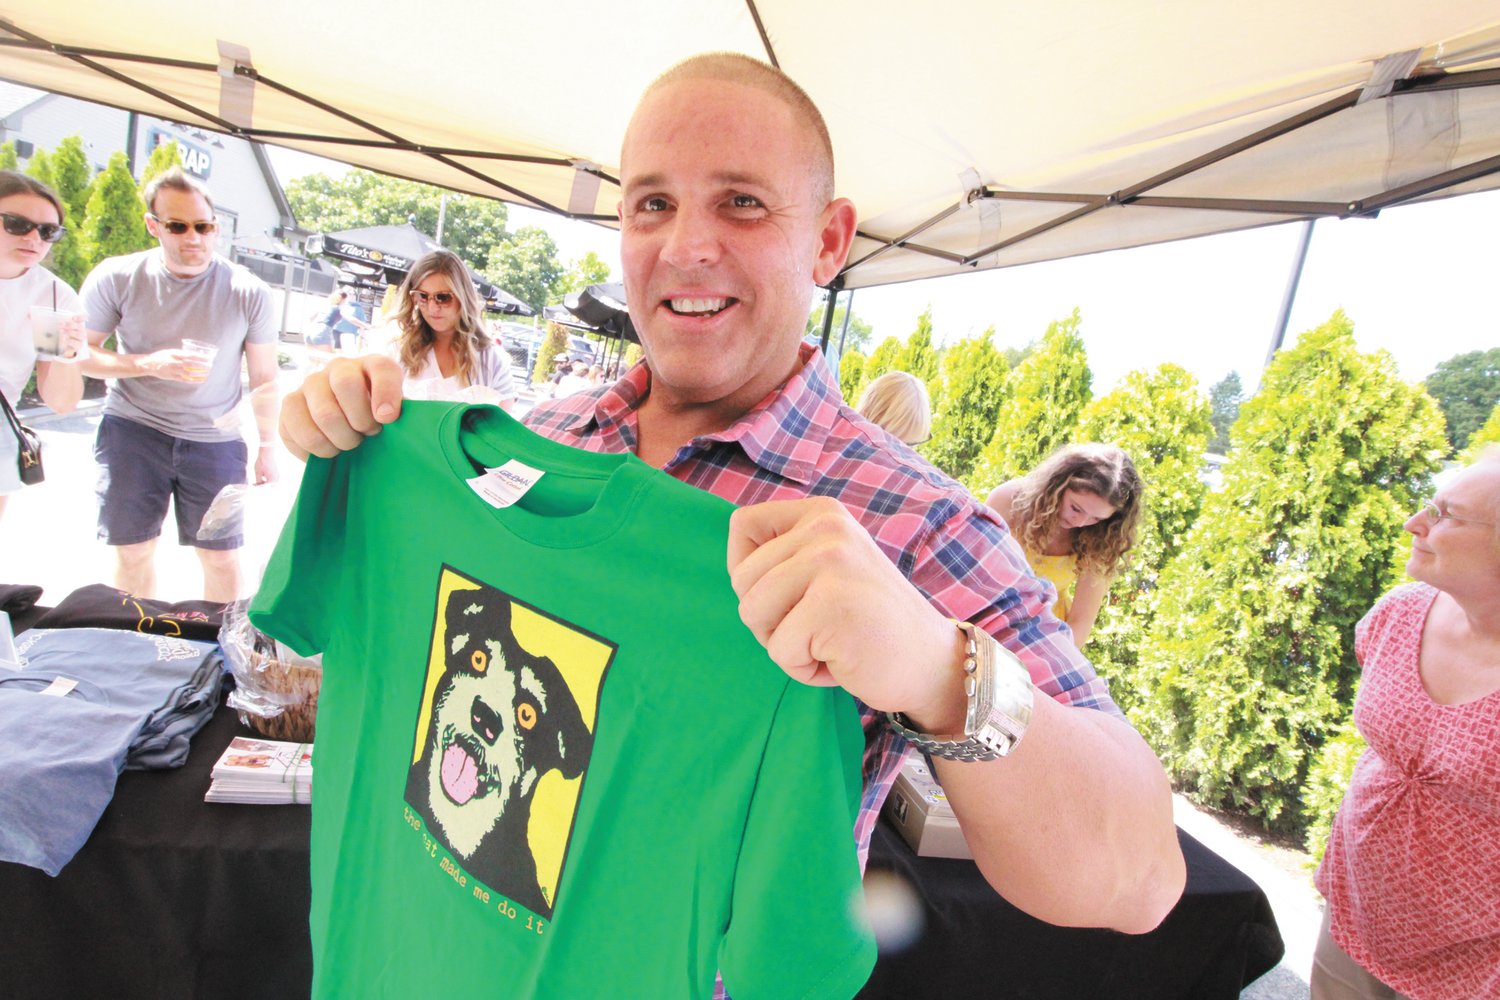 NOW THAT’S A GOOD ONE: Dave DelRossi, who came up with and coordinated Tito’s & Treats at the Trap, models one of the T-shirts the Friends of the Warwick Animal Shelter sold at the event.